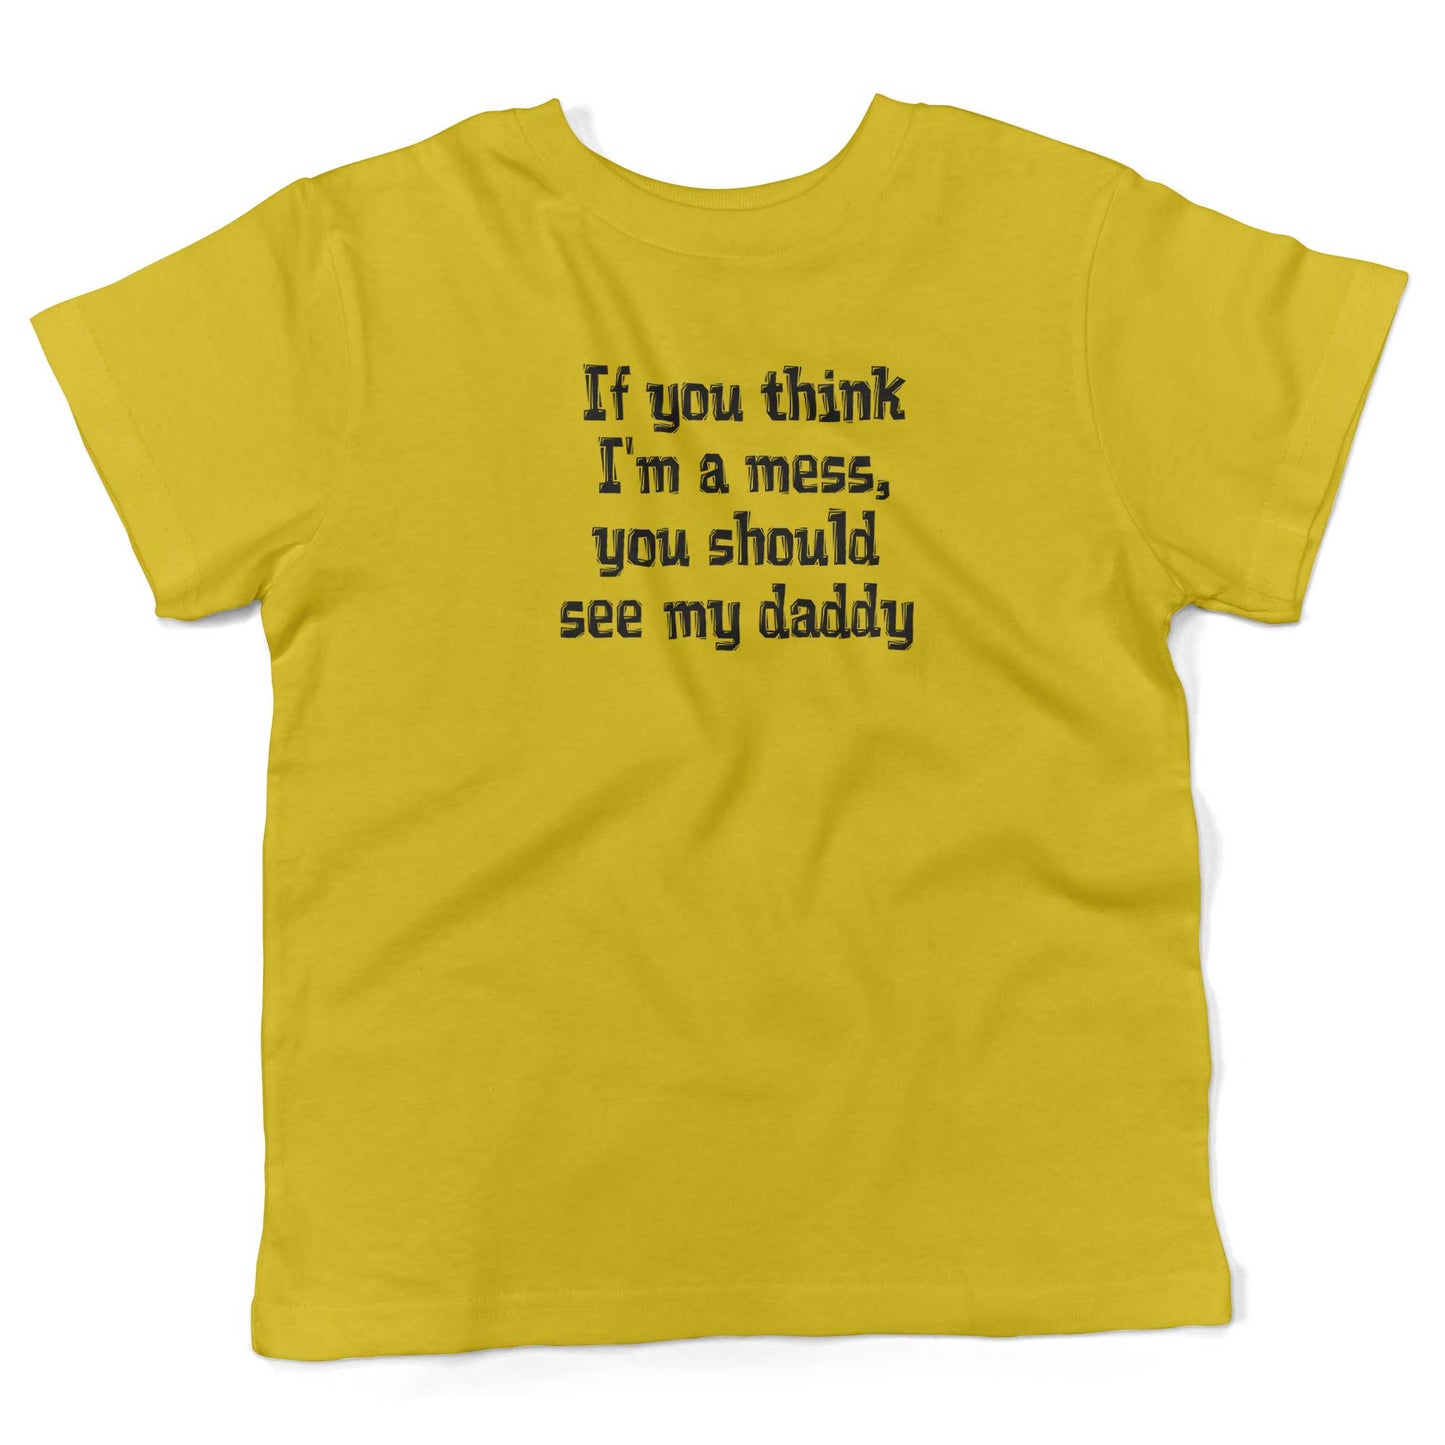 If You Think I'm A Mess, You Should See My Daddy Toddler Shirt-Sunshine Yellow-2T